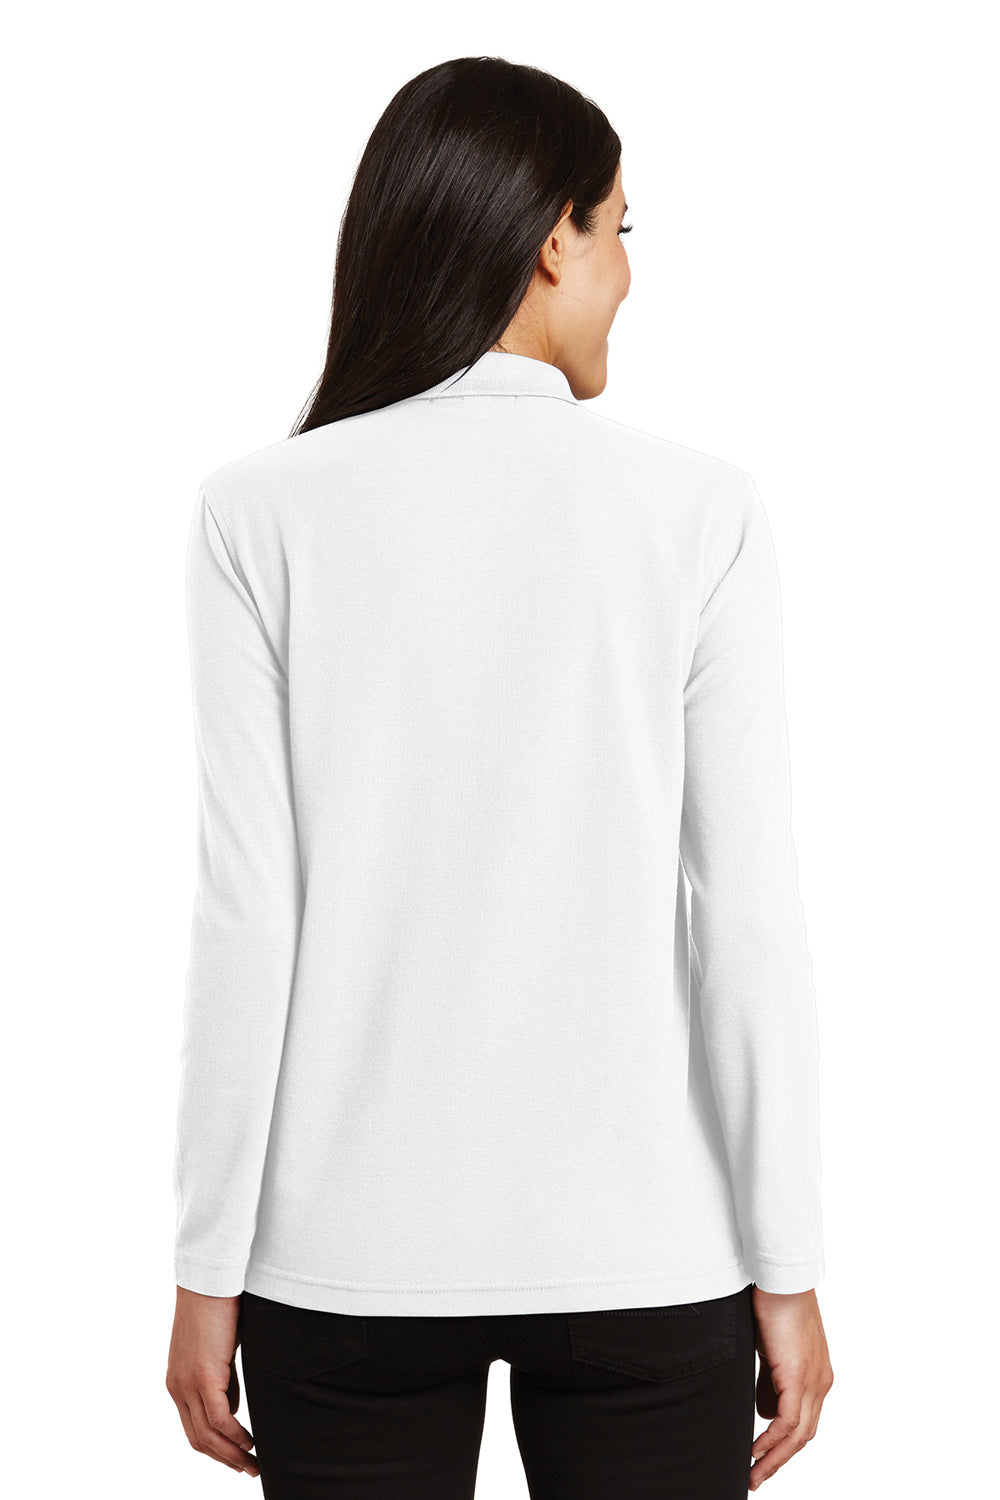 Port Authority L500LS Womens Silk Touch Wrinkle Resistant Long Sleeve Polo Shirt White Back